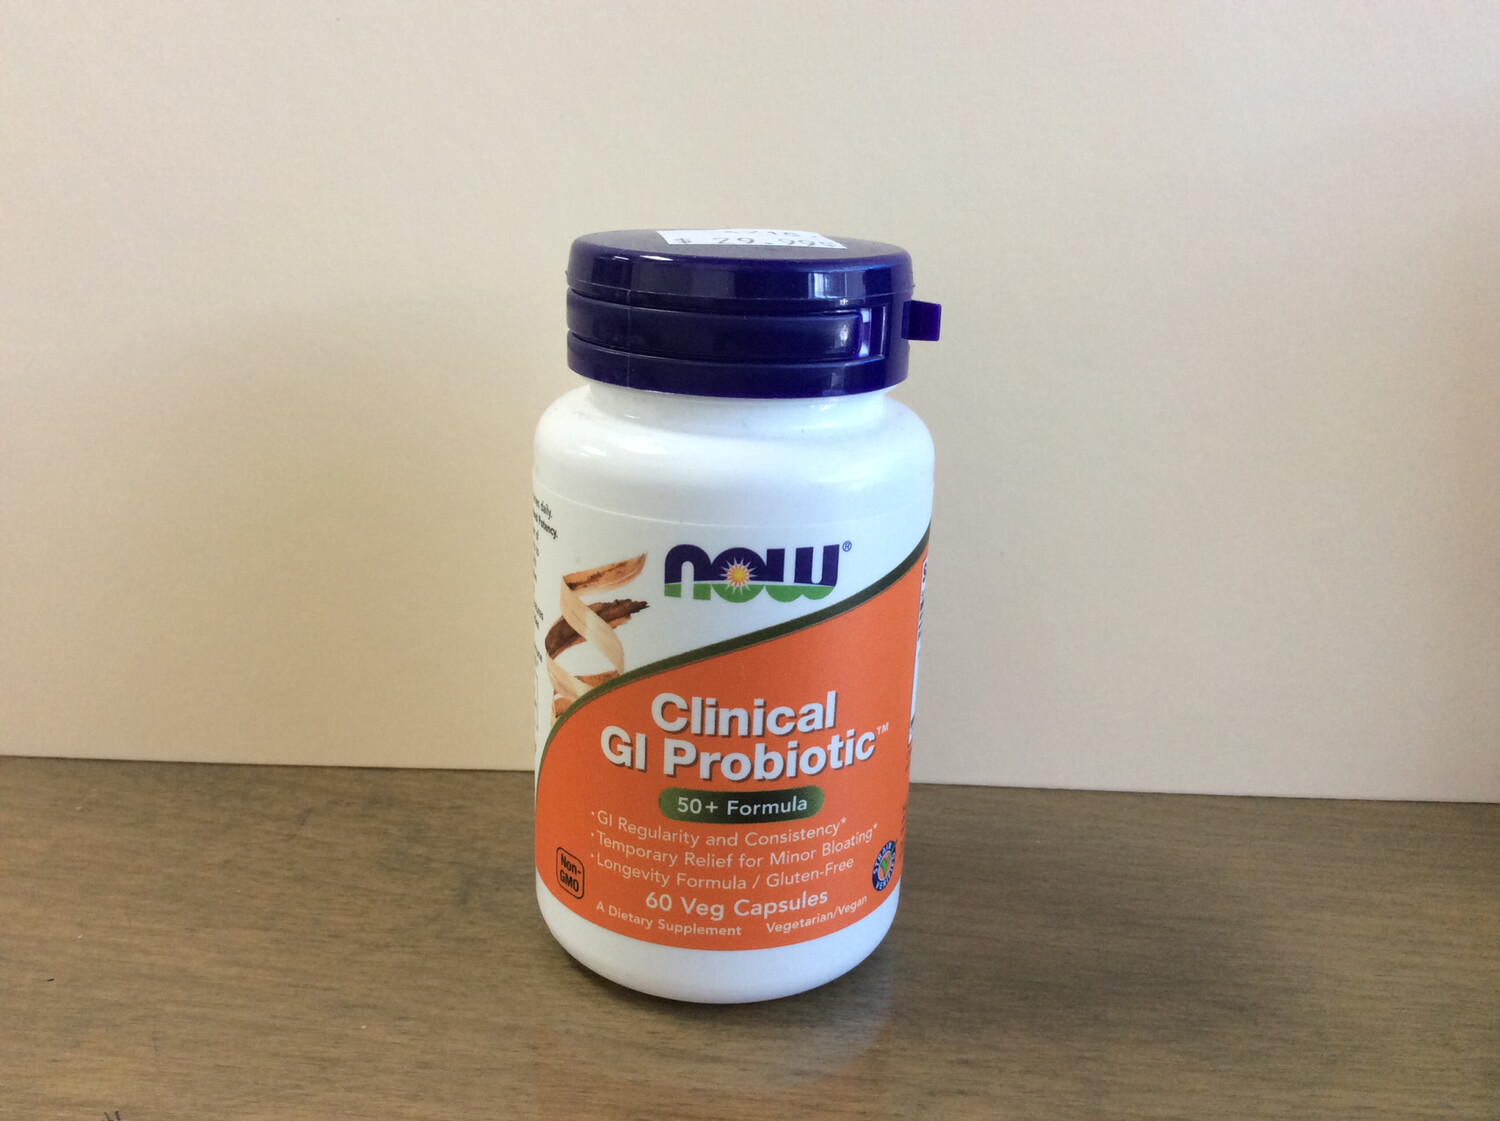 Clinical GI Probiotic 50+ 60ct